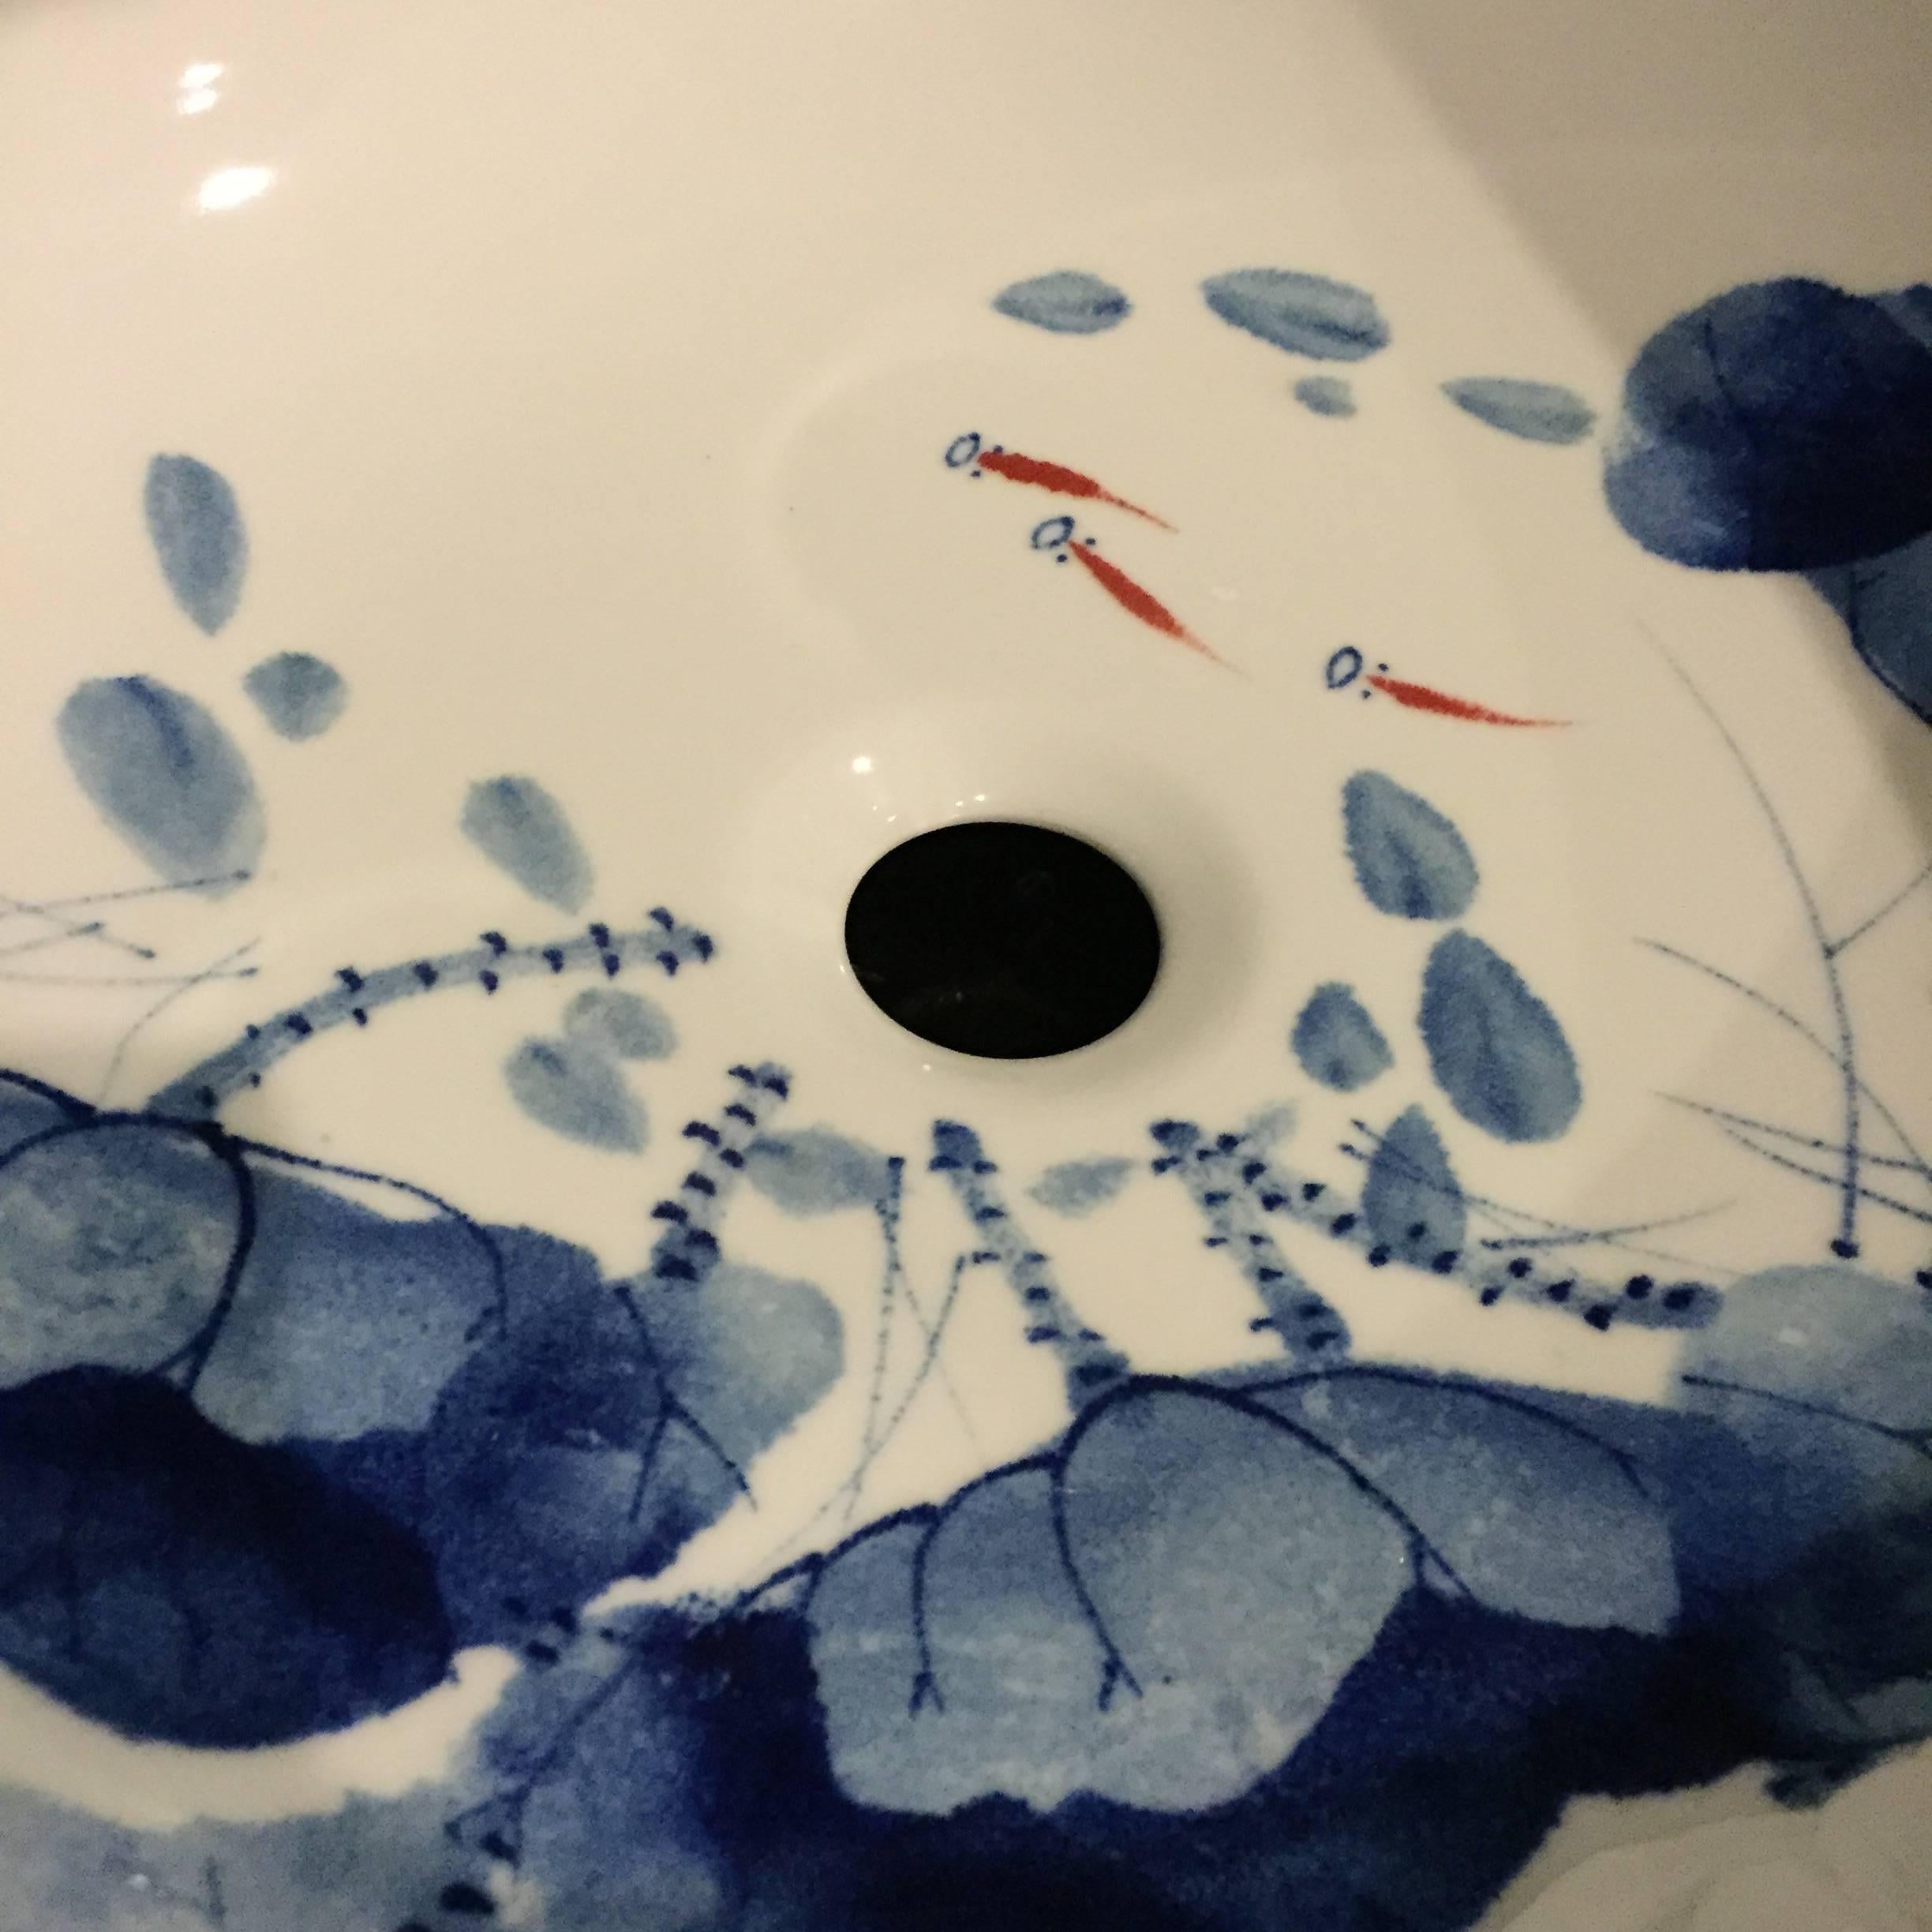 Contemporary Pair of Blue and White Ceramic Sinks, Hand-Painted